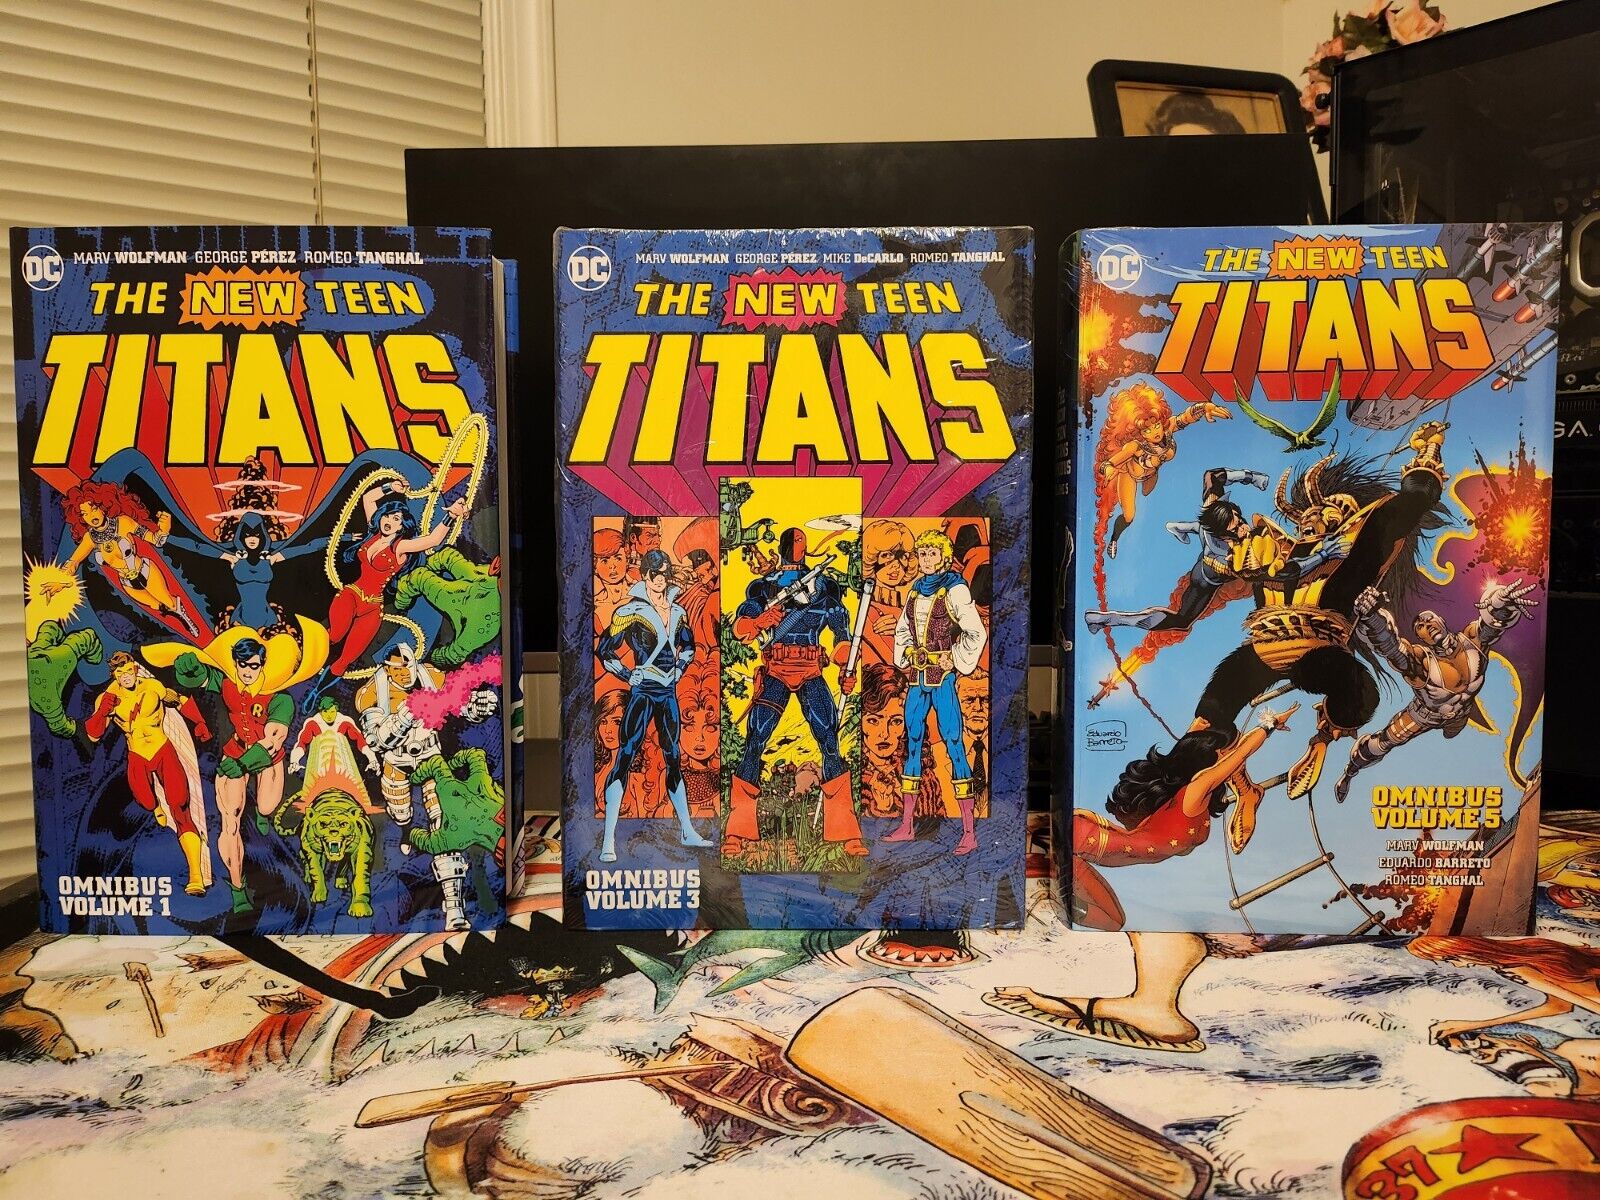 The New Teen Titans Omnibus Vol 1, 3 & 5 by Marv Wolfman & George Perez Sealed 